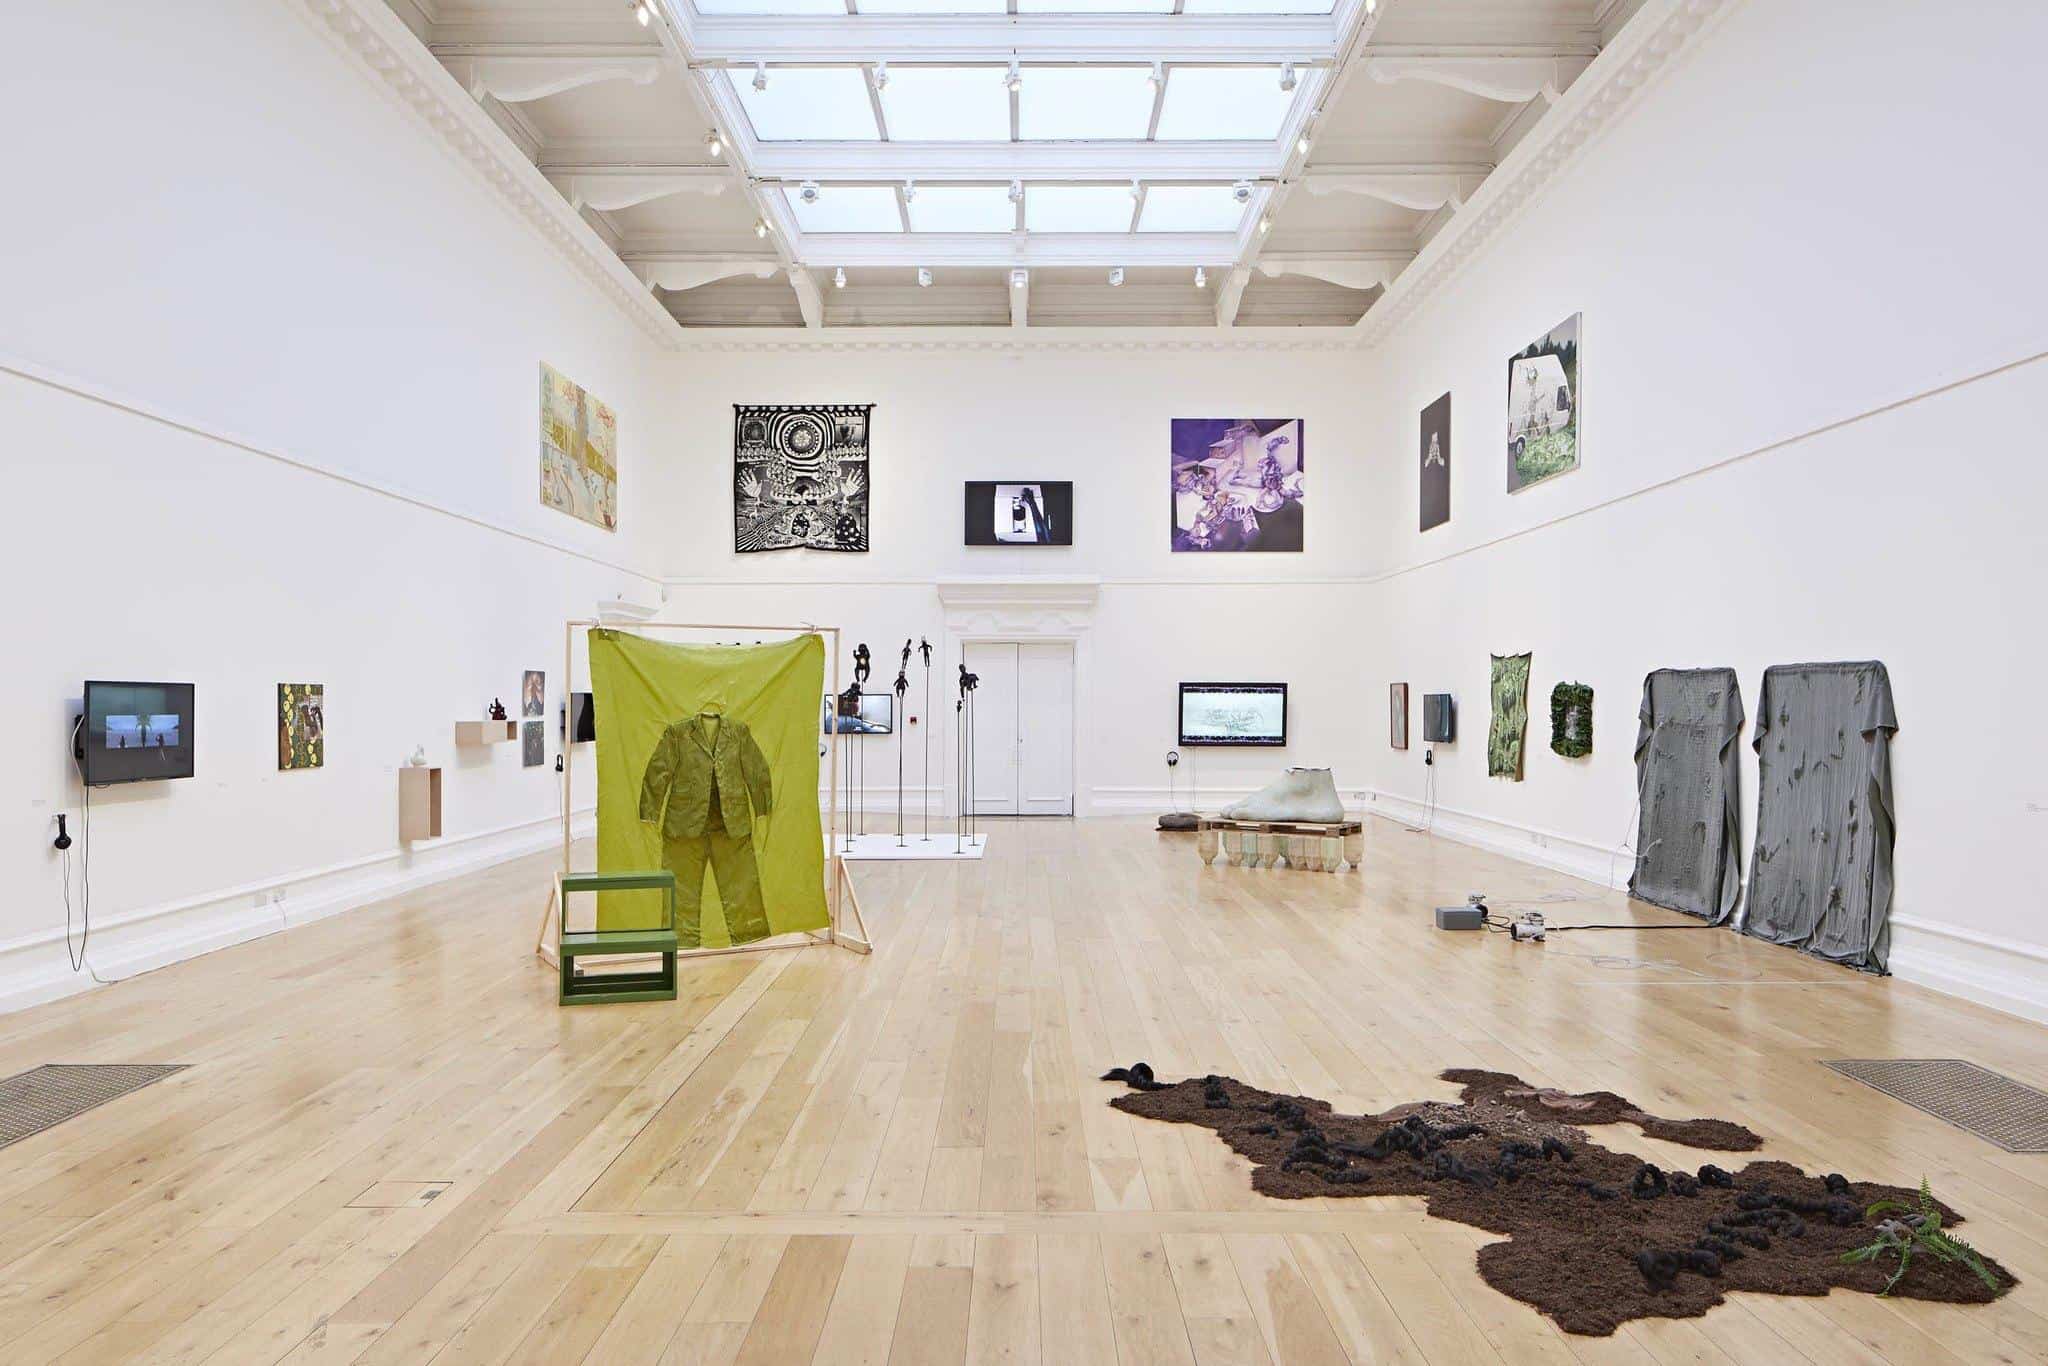 Bloomberg New Contemporaries, Main Gallery, Photo by Andy Stagg, 2021.